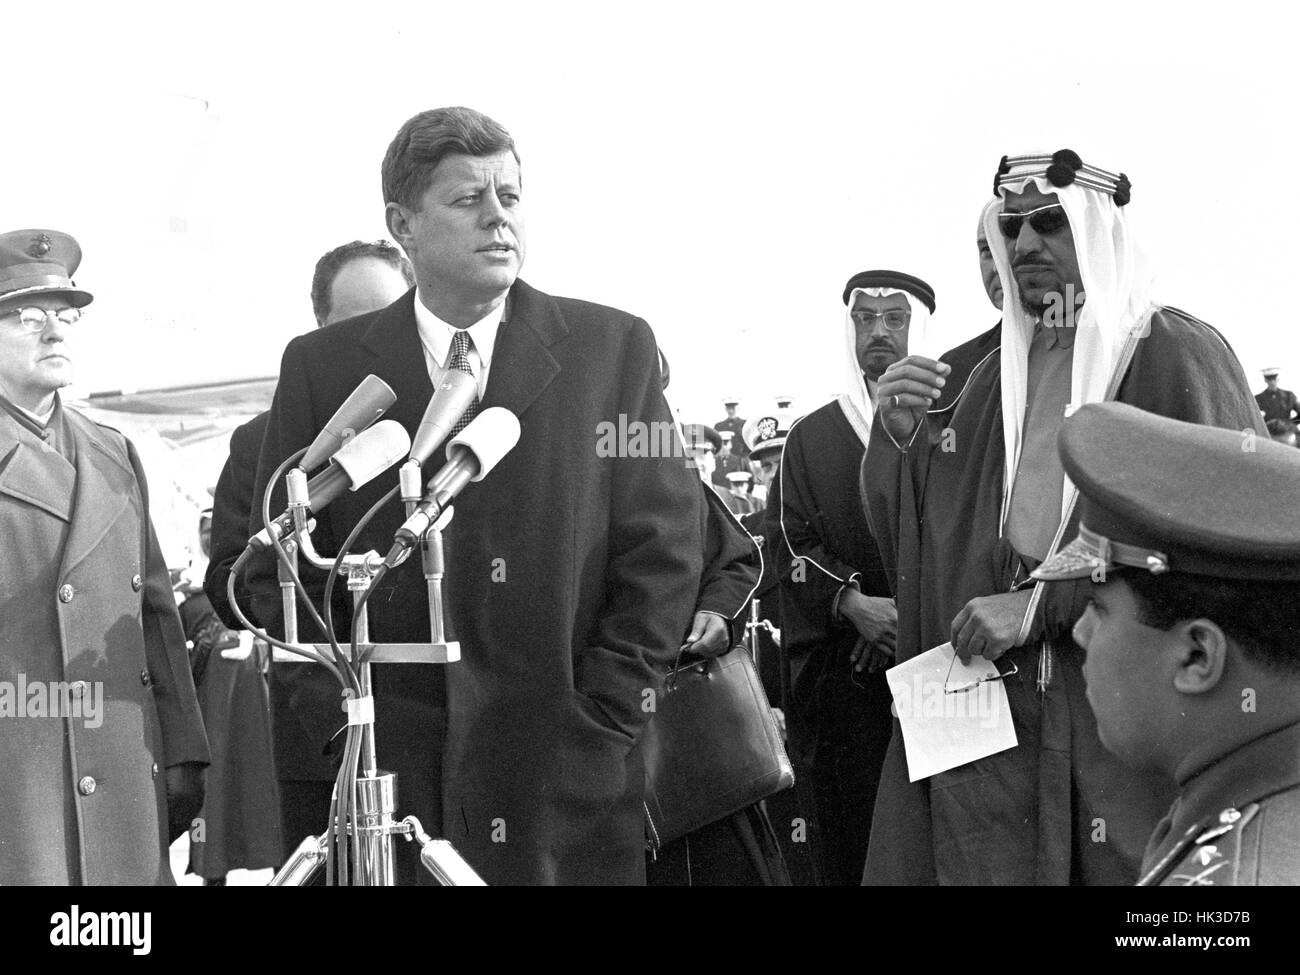 United States President John F. Kennedy welcomes a delegation led by King Saud bin Abdulaziz Al Saud of Saudi Arabia during a ceremony at Andrews Air Force Base, Maryland on February 13, 1962. Stock Photo